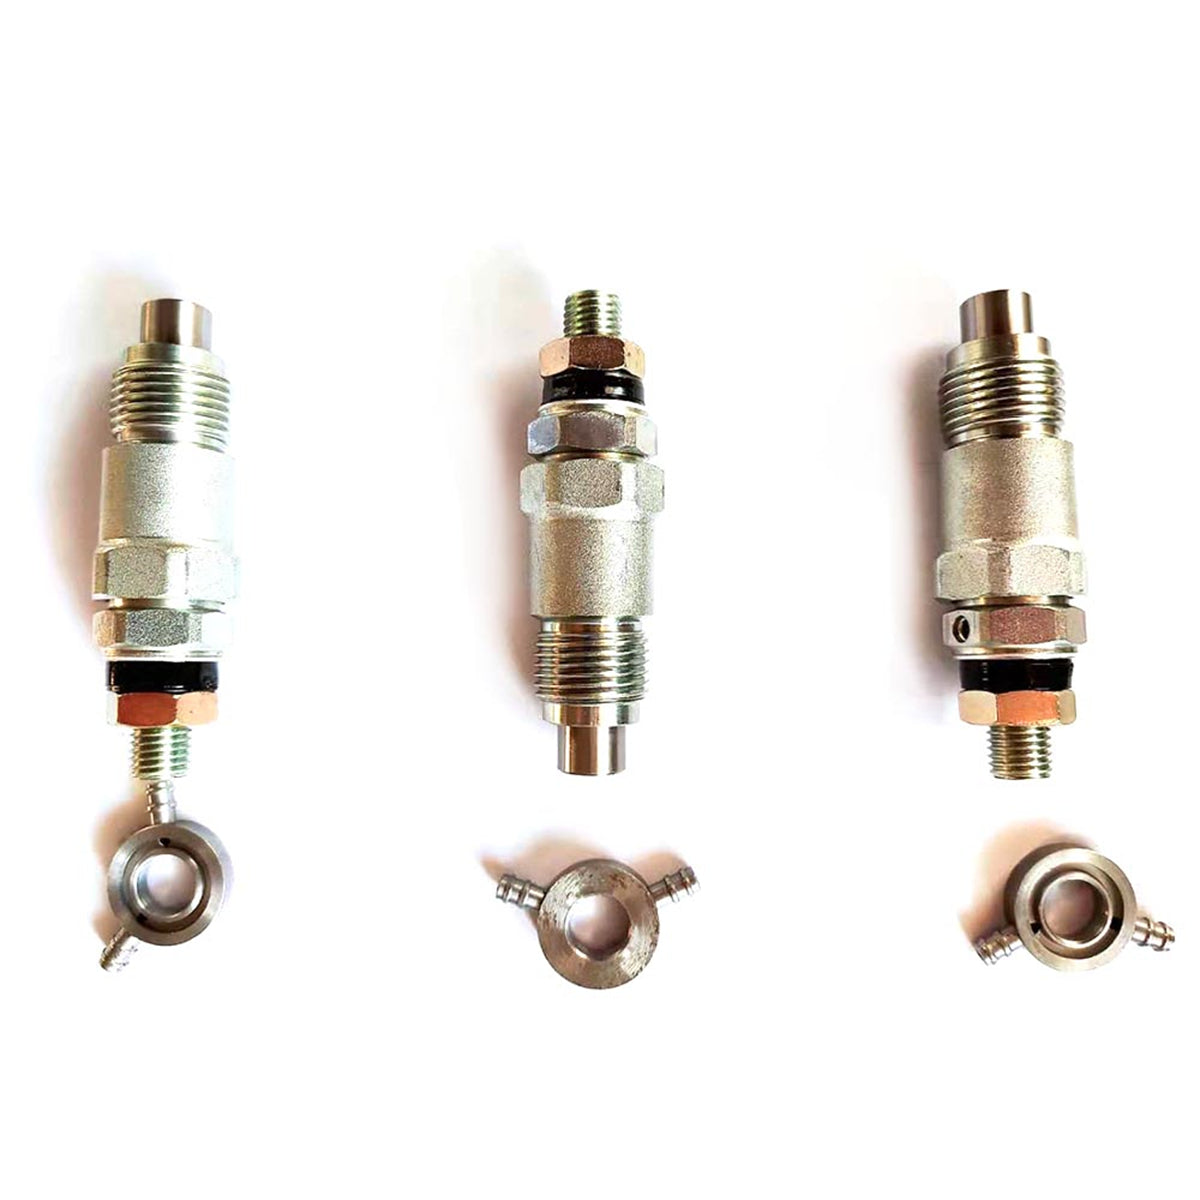 Fuel Injector 15271-53000, Fuel Injector for Kubota, Daysyore Fuel Injector, Auto Fuel Injector, Car Fuel Injector